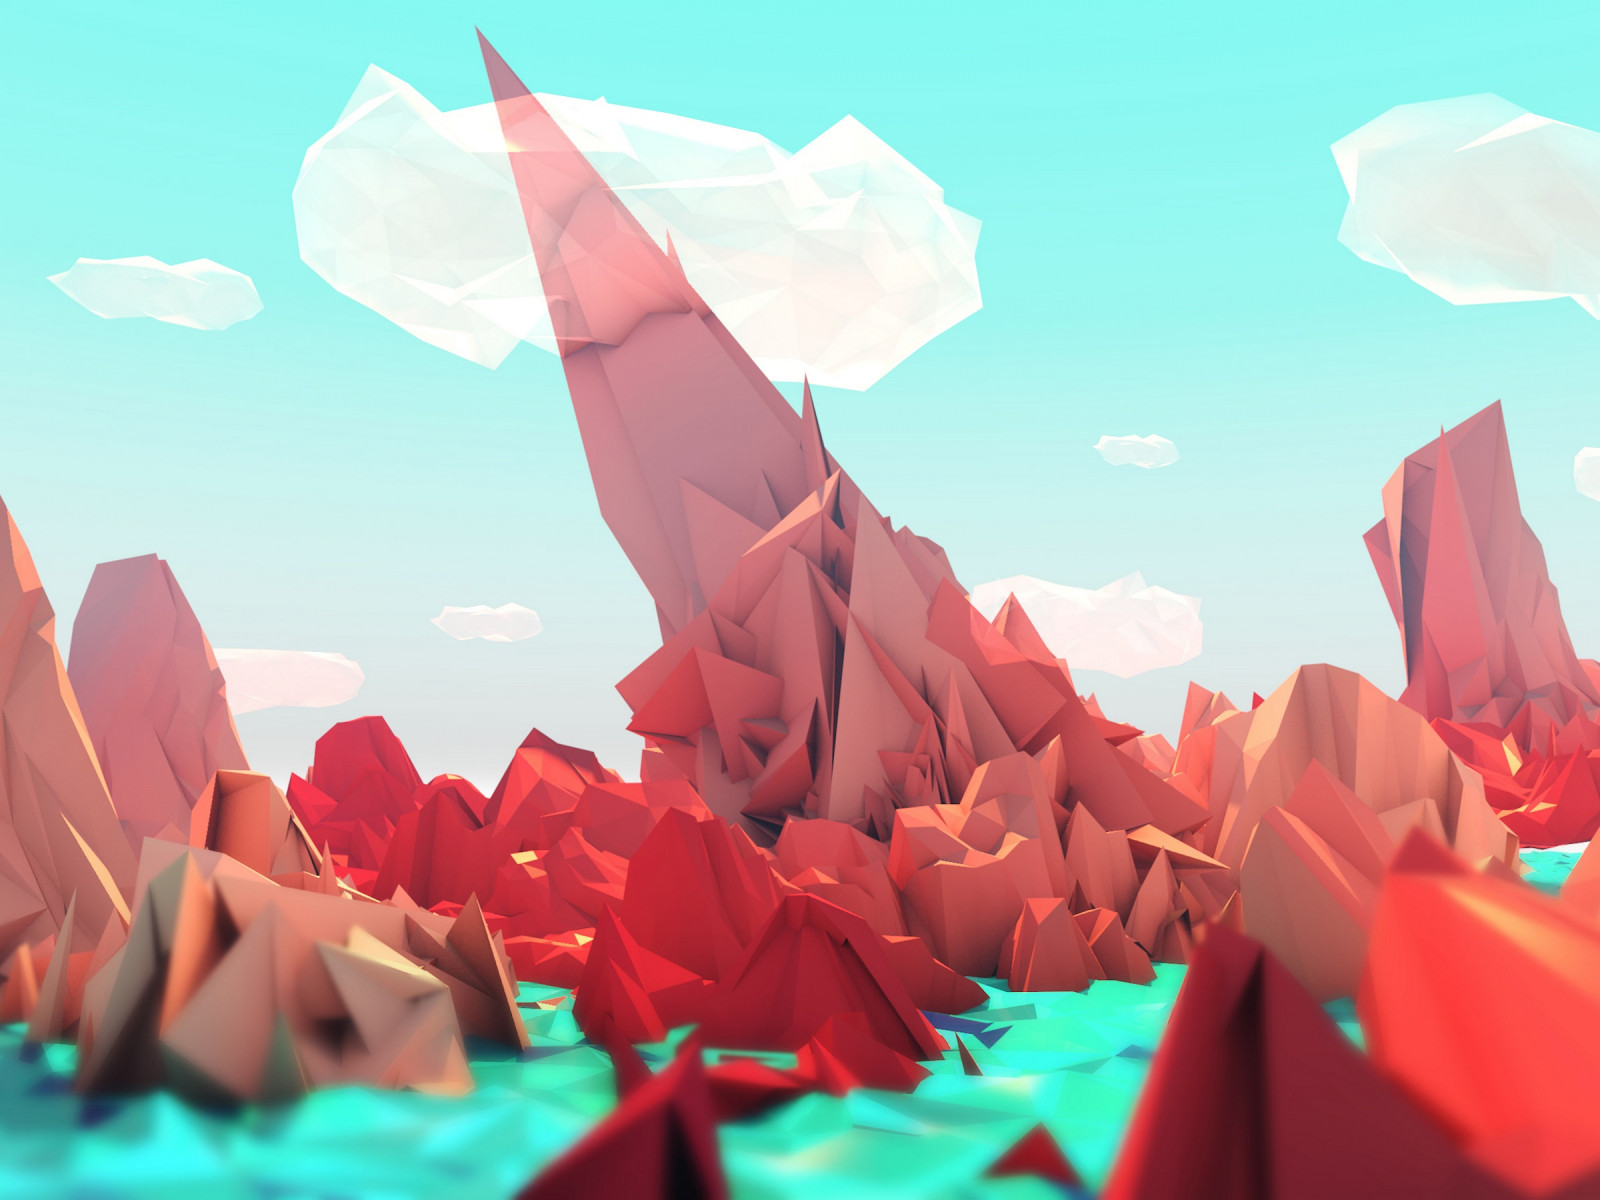 The red mountains. Low poly illustration wallpaper 1600x1200